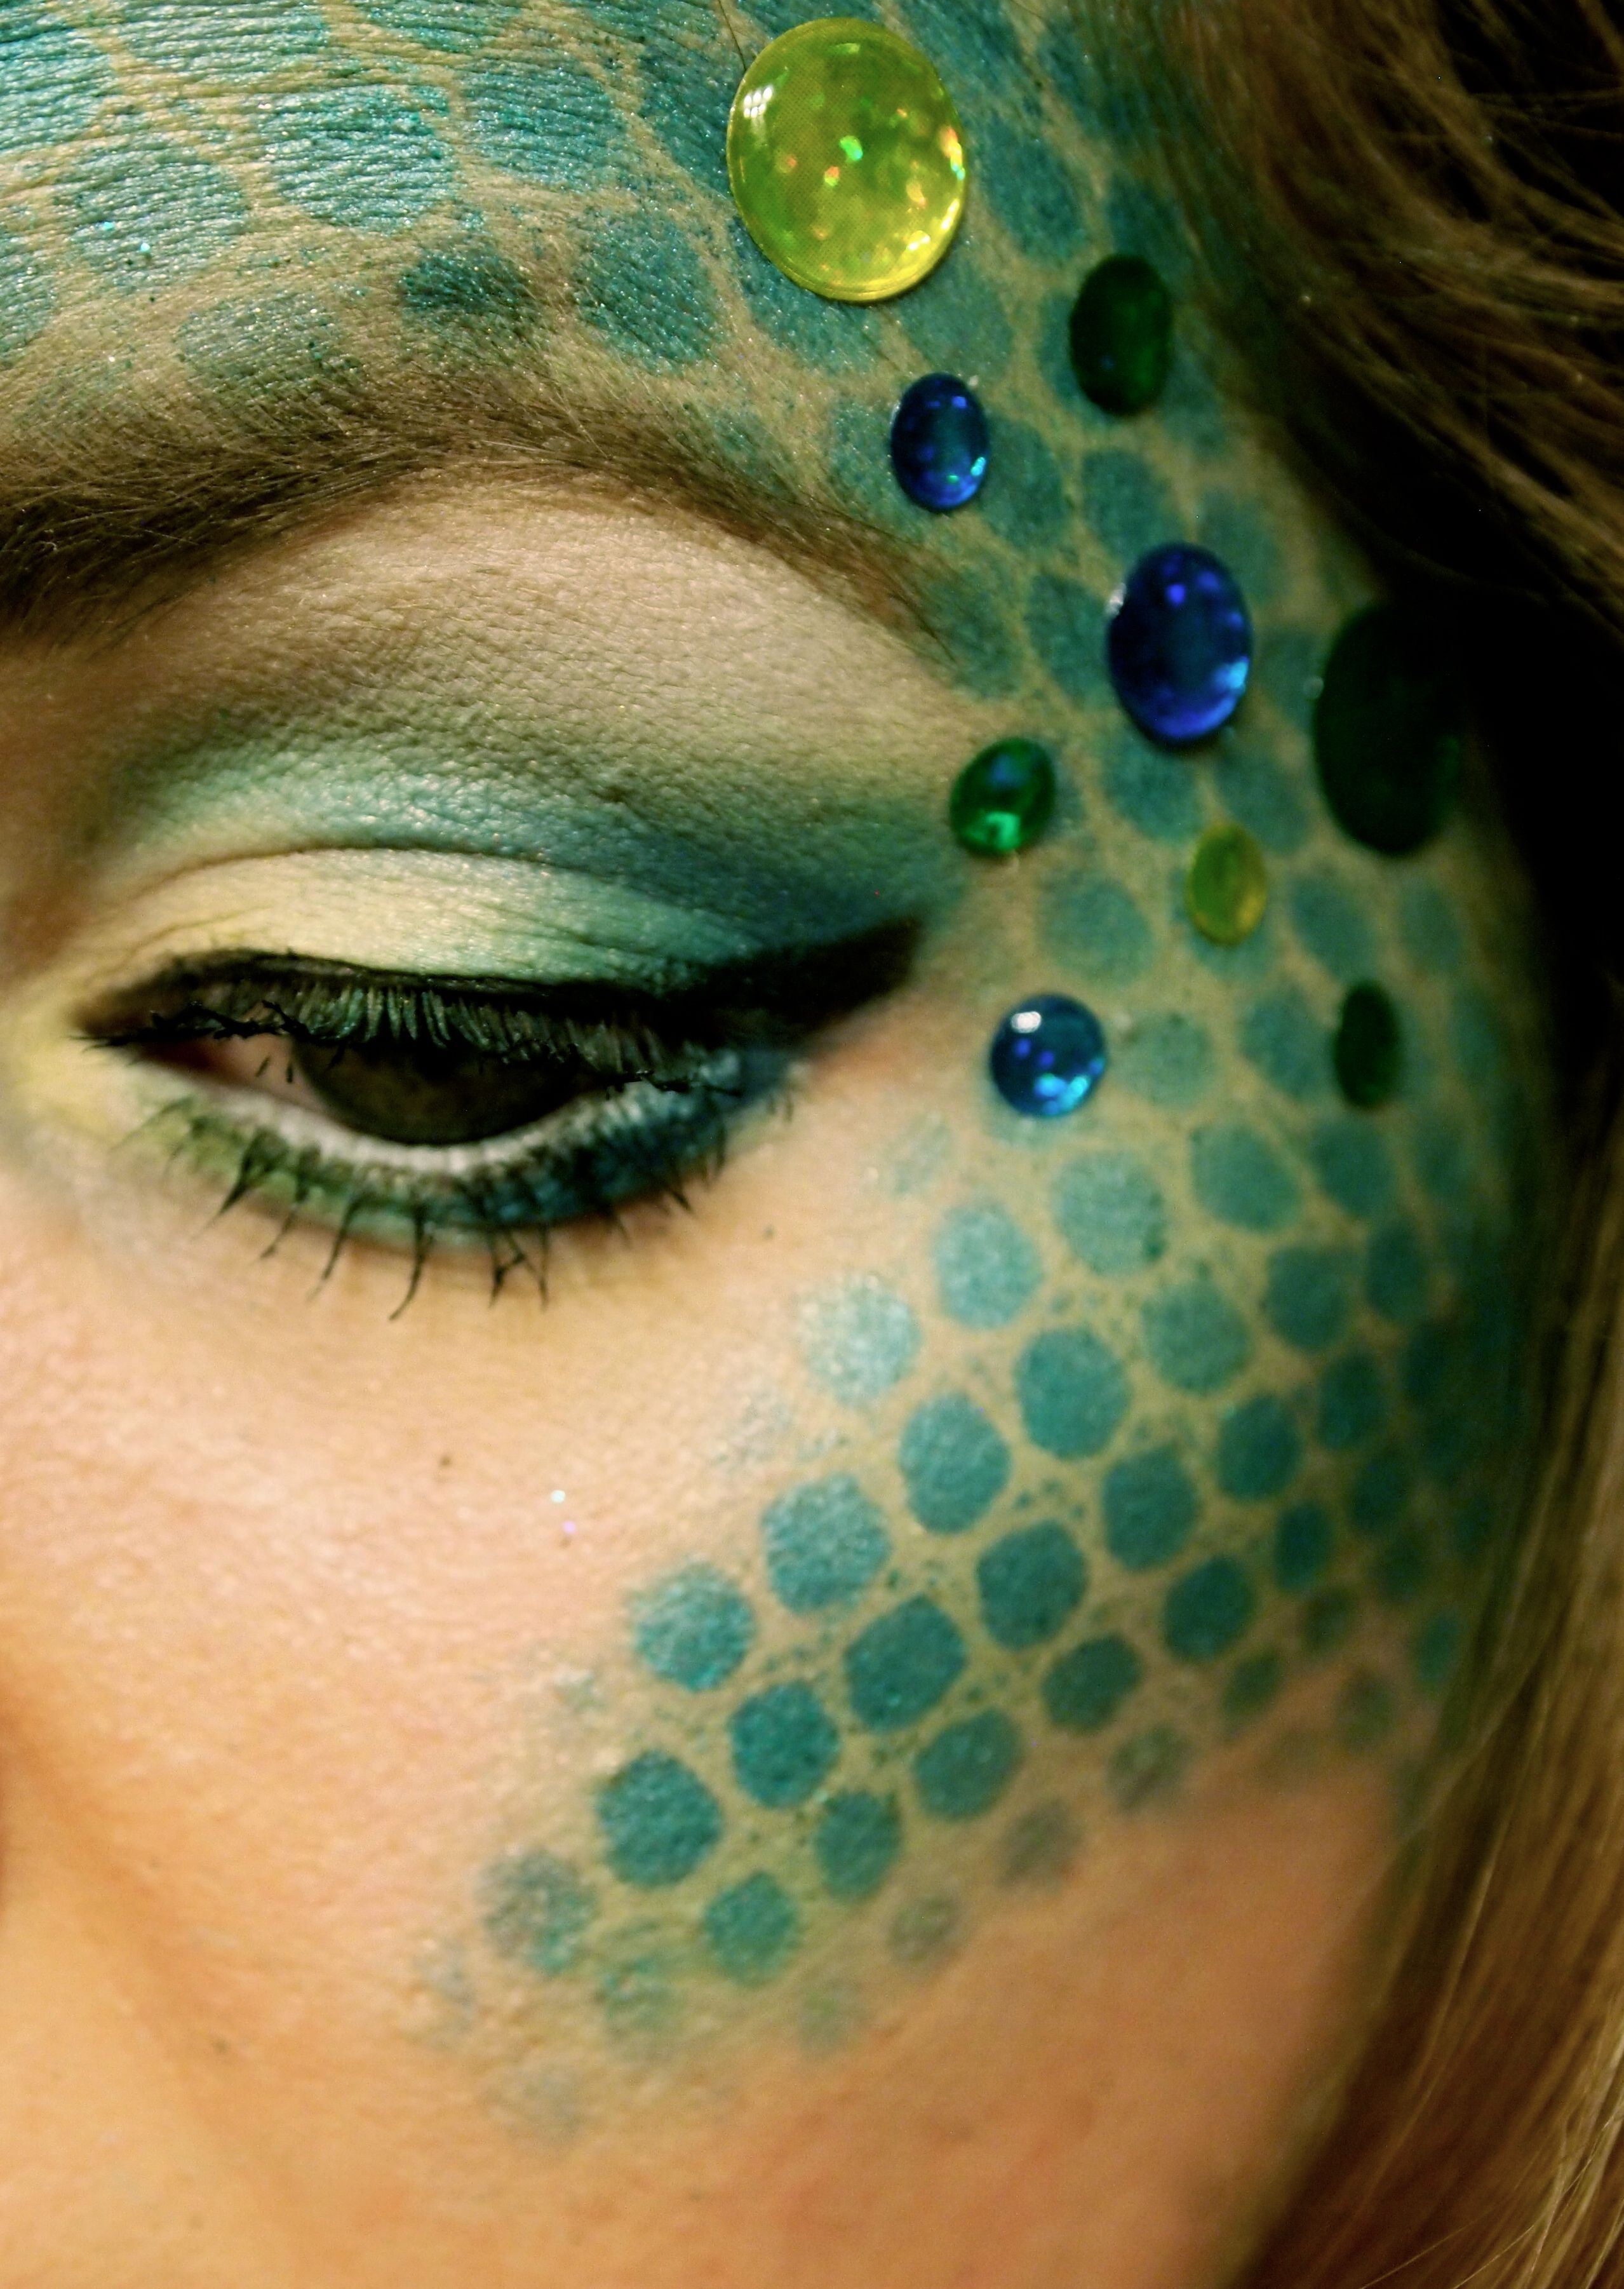 Mermaid Makeup: The BeShelled Femme or The Scaled Goddess Mermaid makeup is PHENOMENAL fun because there are so many different